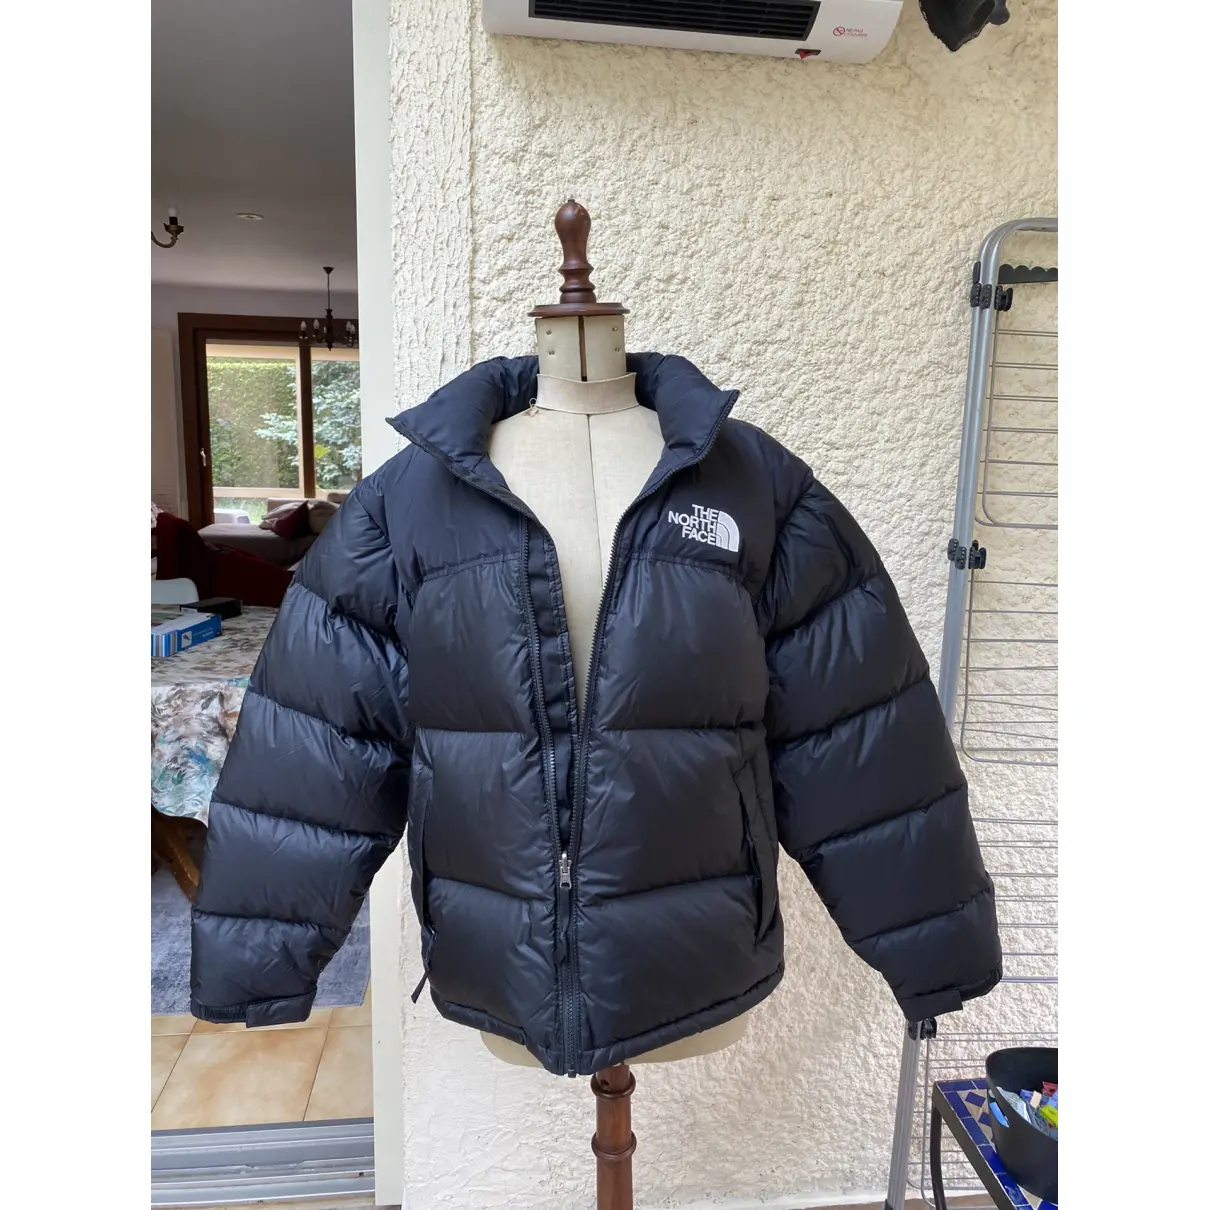 Buy The North Face Cloth puffer online